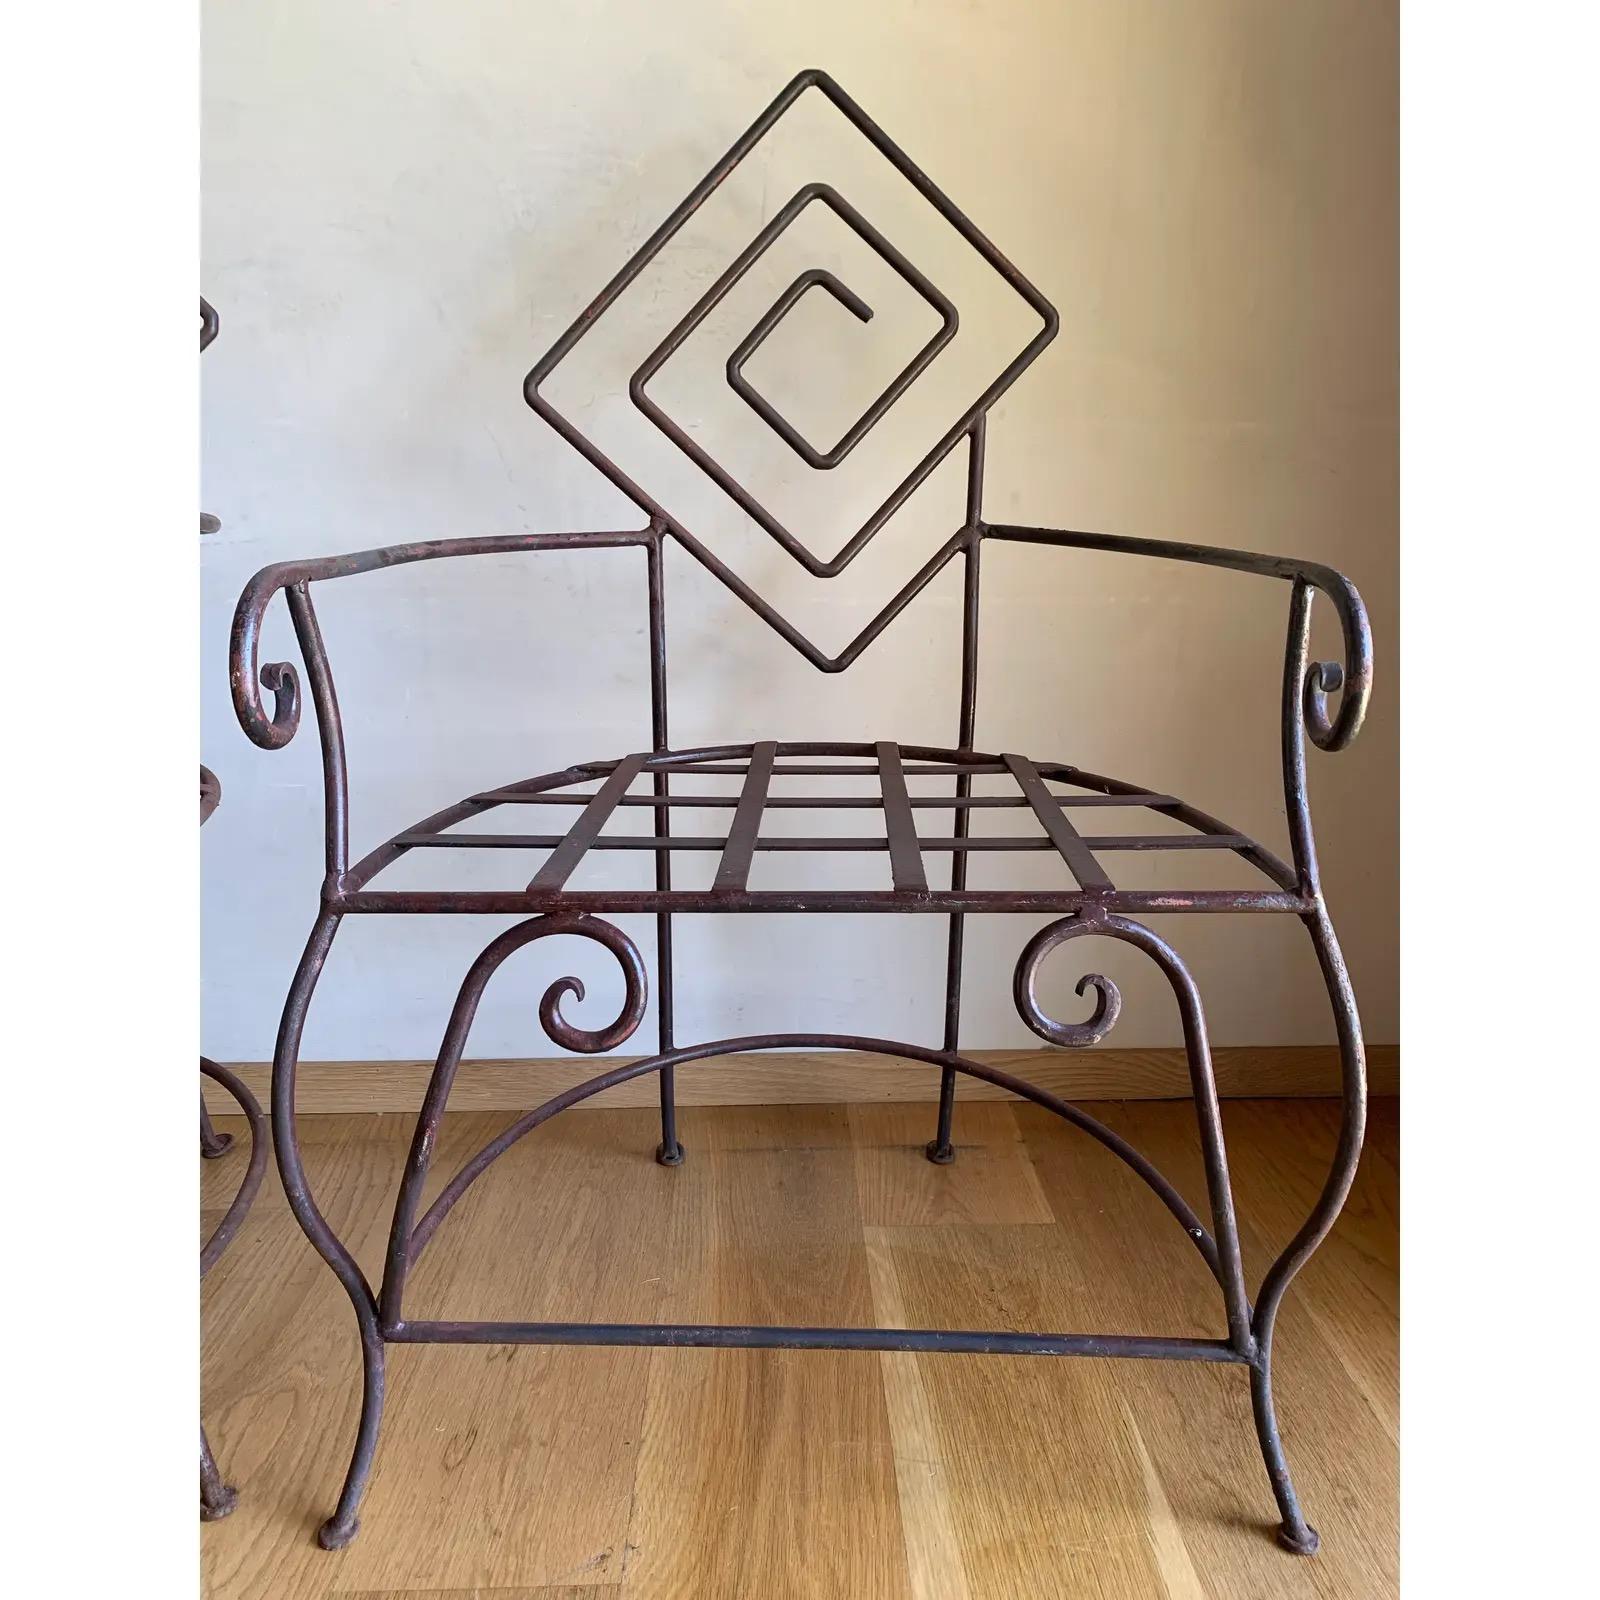 Mexican Vintage Artisan Iron Geometric Sculptural Frank Lloyd Wright Style Armchairs-4 For Sale